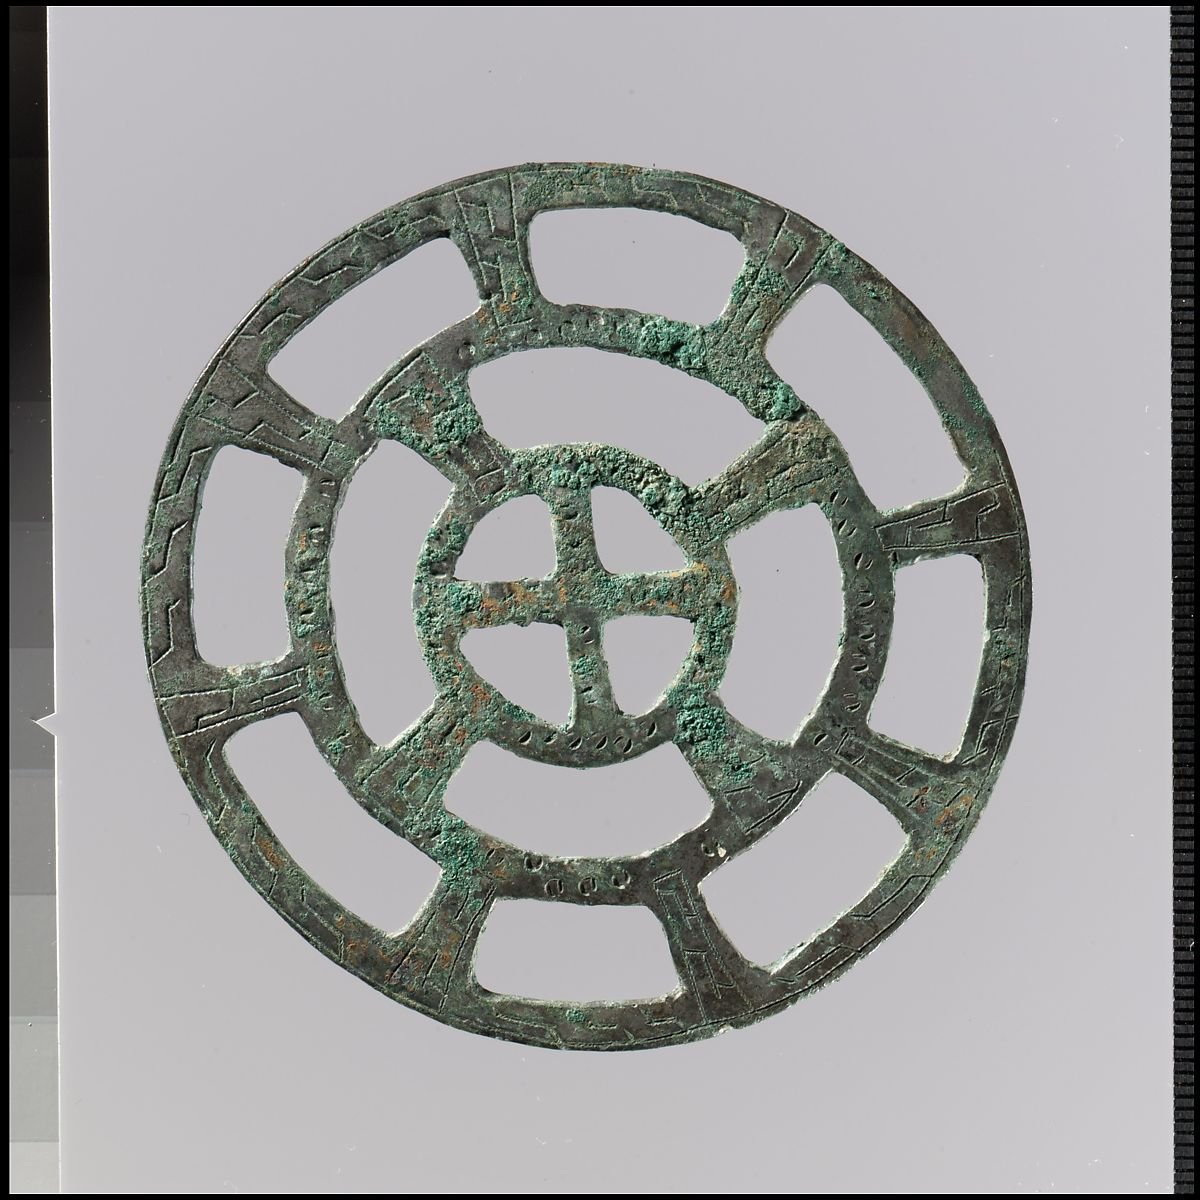 These examples are all in the Metropolitan Museum of Art, with a 7th - 8th century date. They are key rings, basically, hung from the belt, with tools, keys or ornaments hanging from the different loops. In some places, the wear marks are really clear. Copper alloy, often tinned.